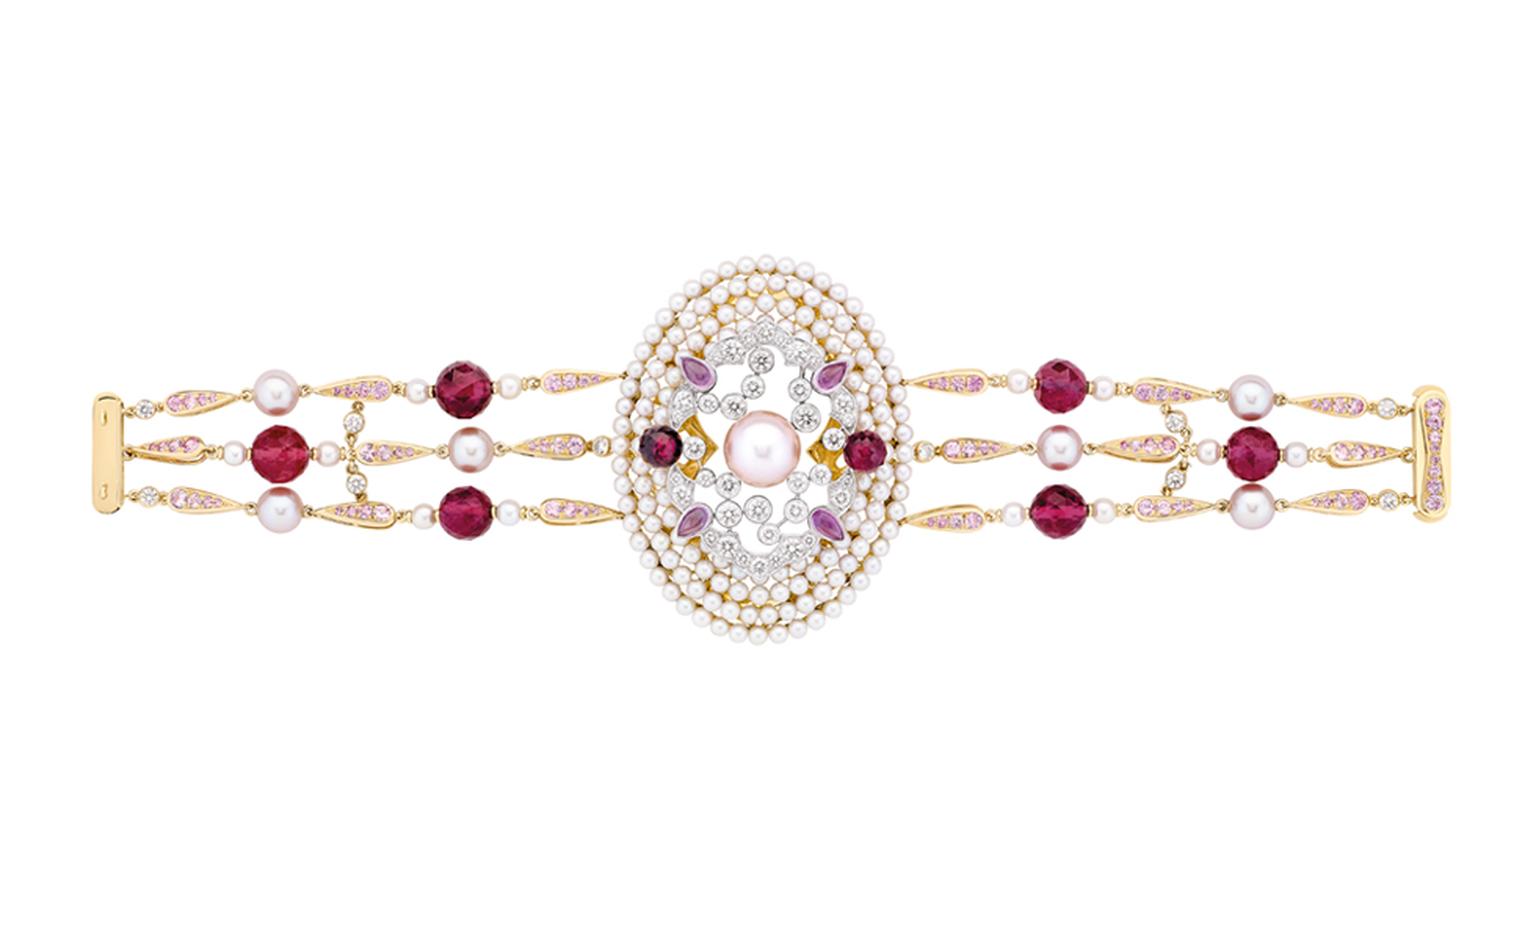 Chanel Secrets D'Orient  Byzance Bracelet in 18 karat white and pink gold, diamonds, cultured pearls, pink sapphires and rubellites